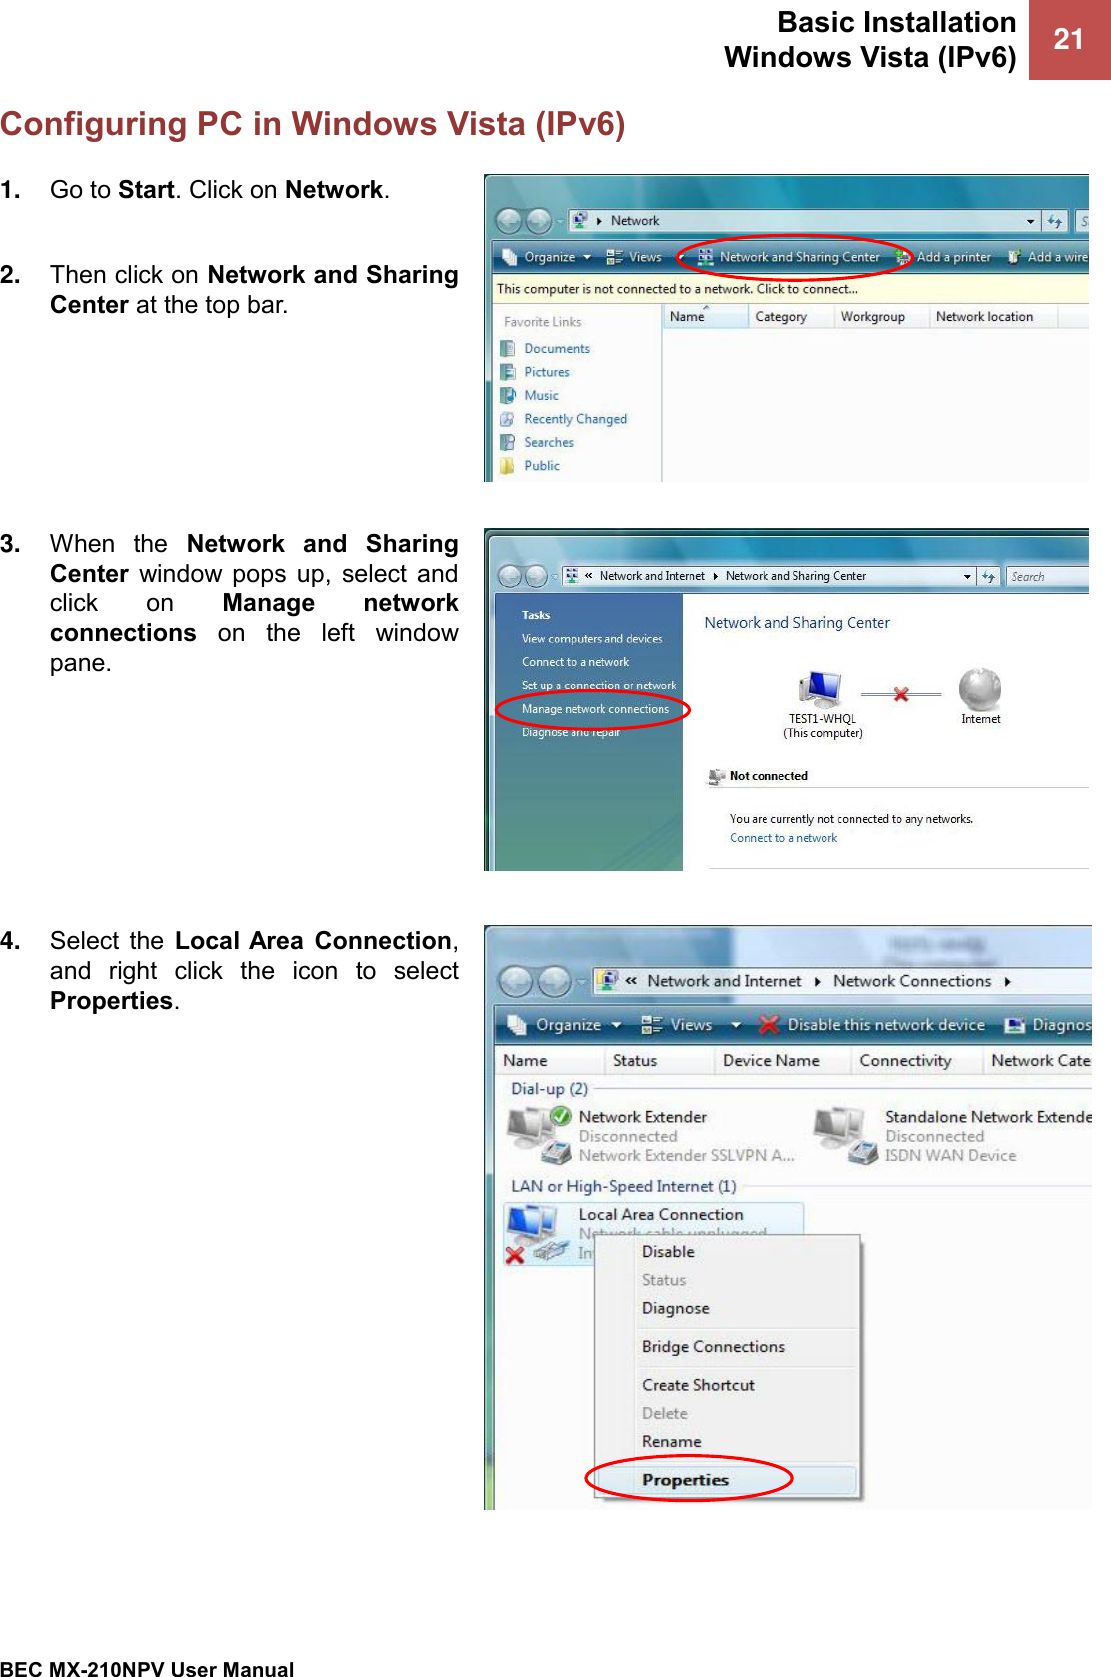 Basic Installation Windows Vista (IPv6) 21   BEC MX-210NPV User Manual  Configuring PC in Windows Vista (IPv6) 1. Go to Start. Click on Network.  2. Then click on Network and Sharing Center at the top bar.  3. When  the  Network  and  Sharing Center  window  pops up,  select  and click  on  Manage  network connections  on  the  left  window pane.  4. Select  the  Local Area  Connection, and  right  click  the  icon  to  select Properties.  